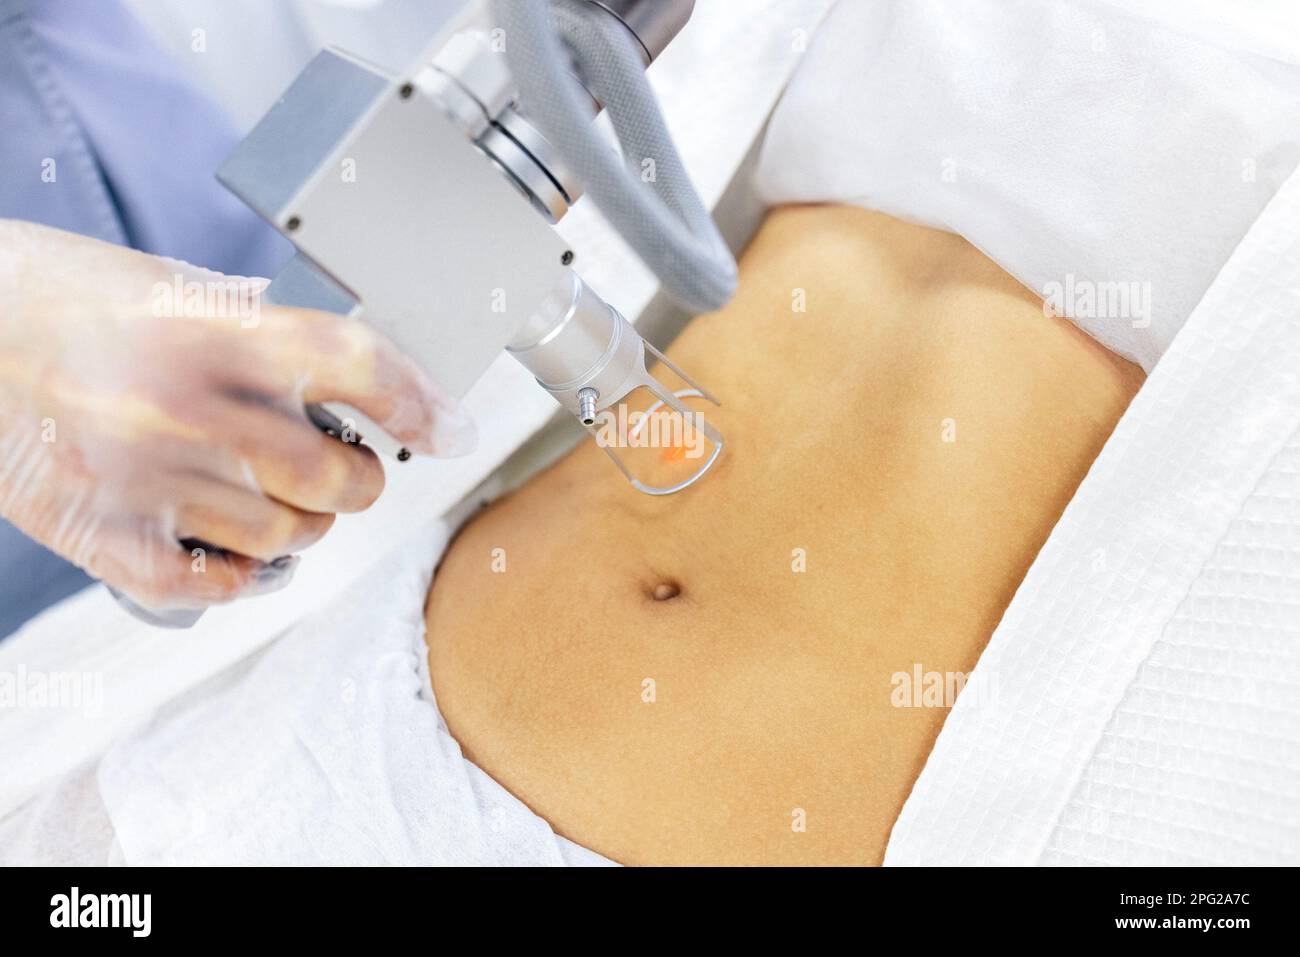 Removing scars with laser. Extreme close up of hand of doctor or cosmetologist in transparent glove, part of apparatus, red laser beam and lower abdom Stock Photo